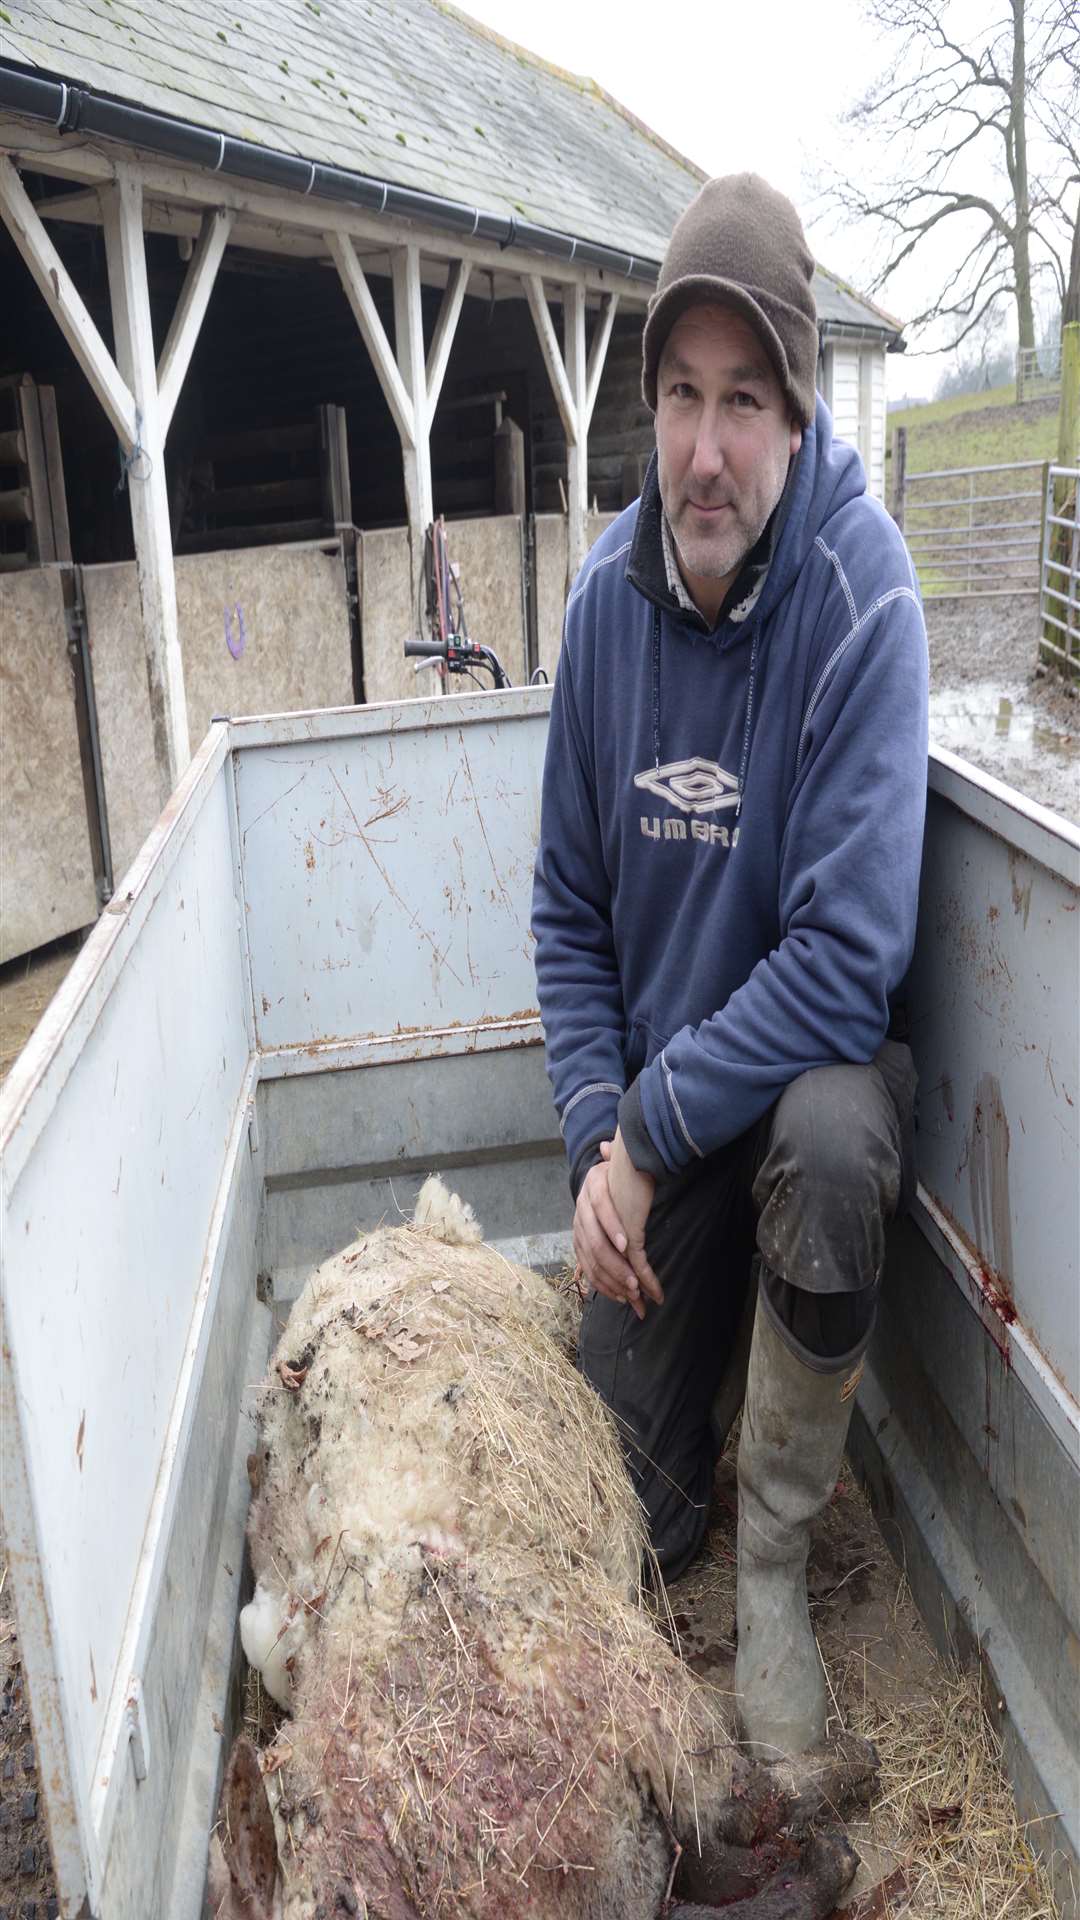 Clive Burgess at Syndale Farm with the sheep attacked by a dog